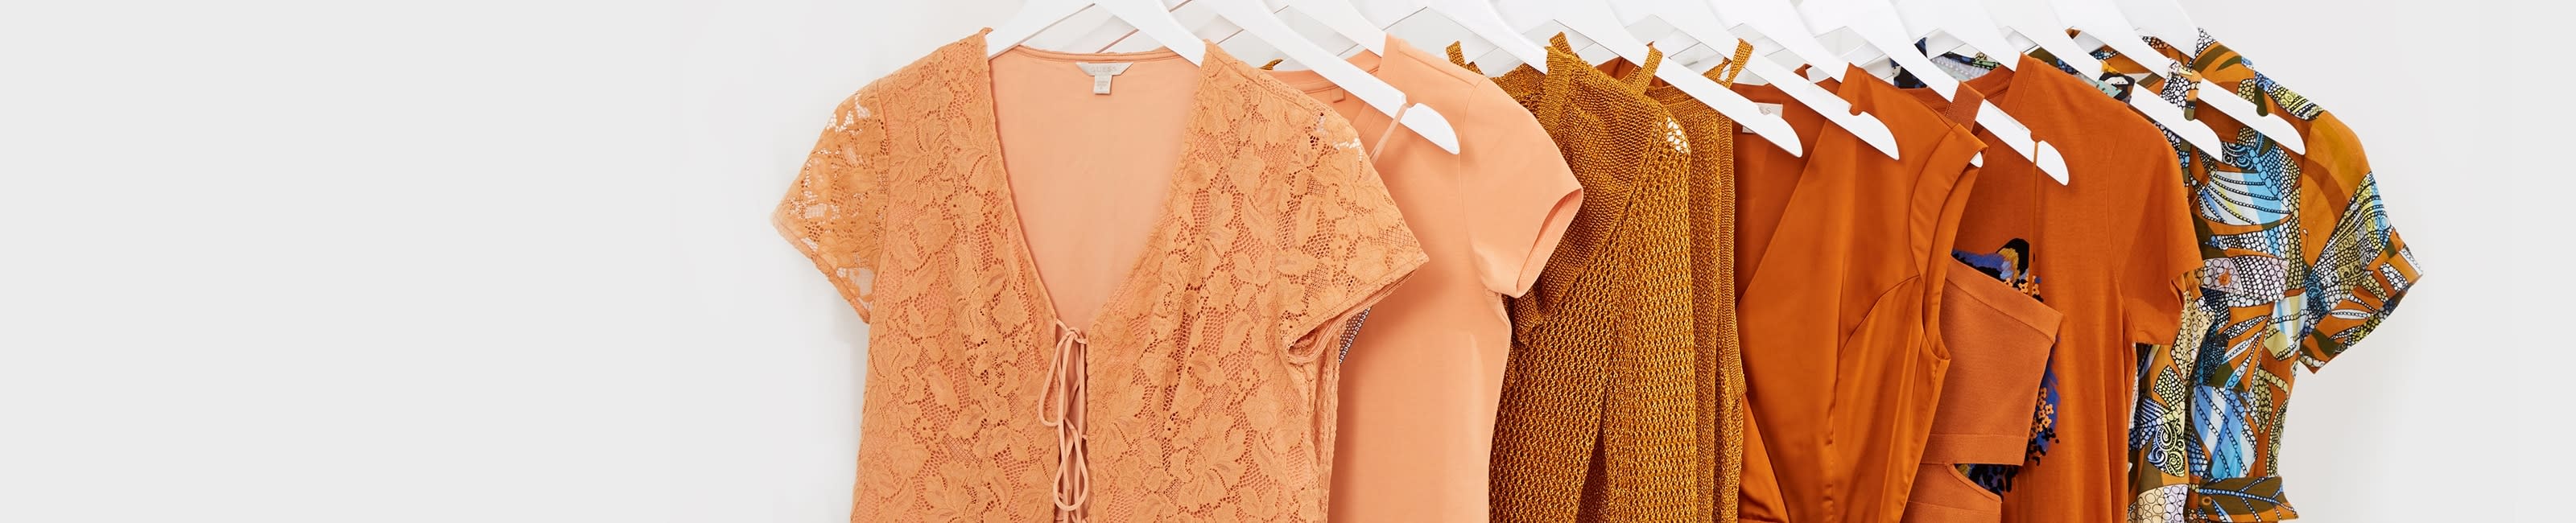 Bronze: This radiant hue transports you to sun kissed days